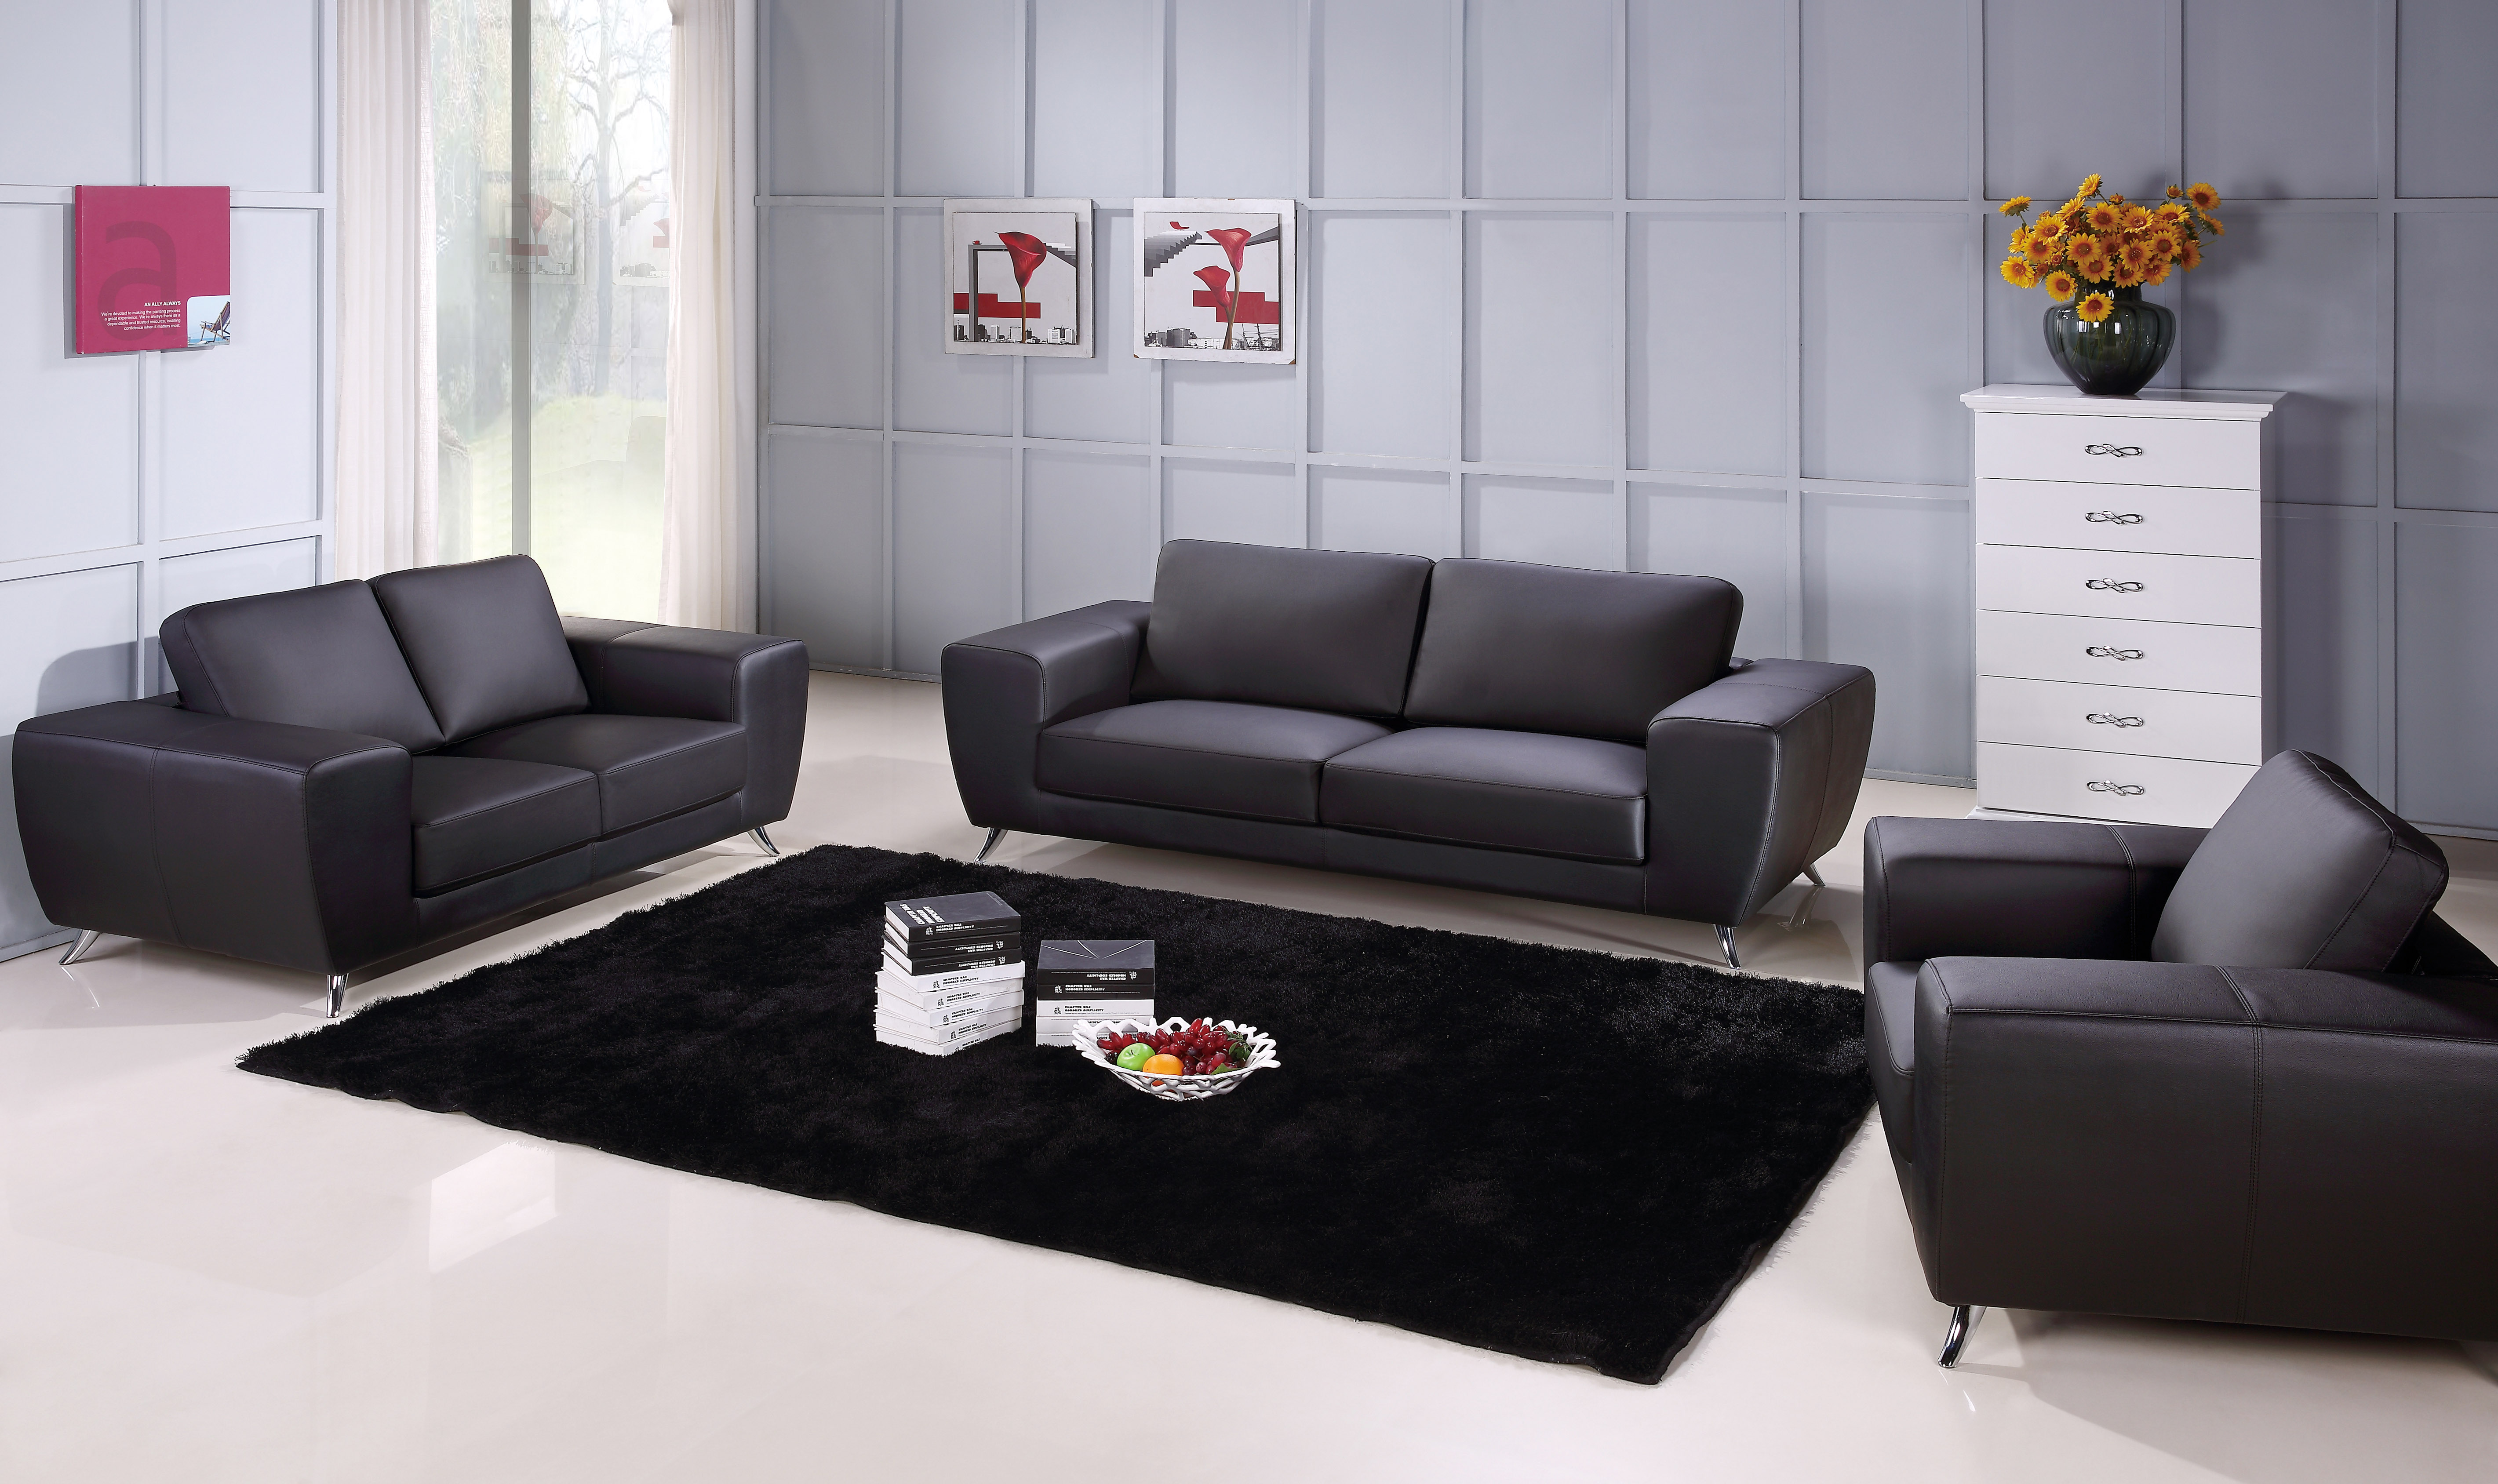 club leather sofa bed